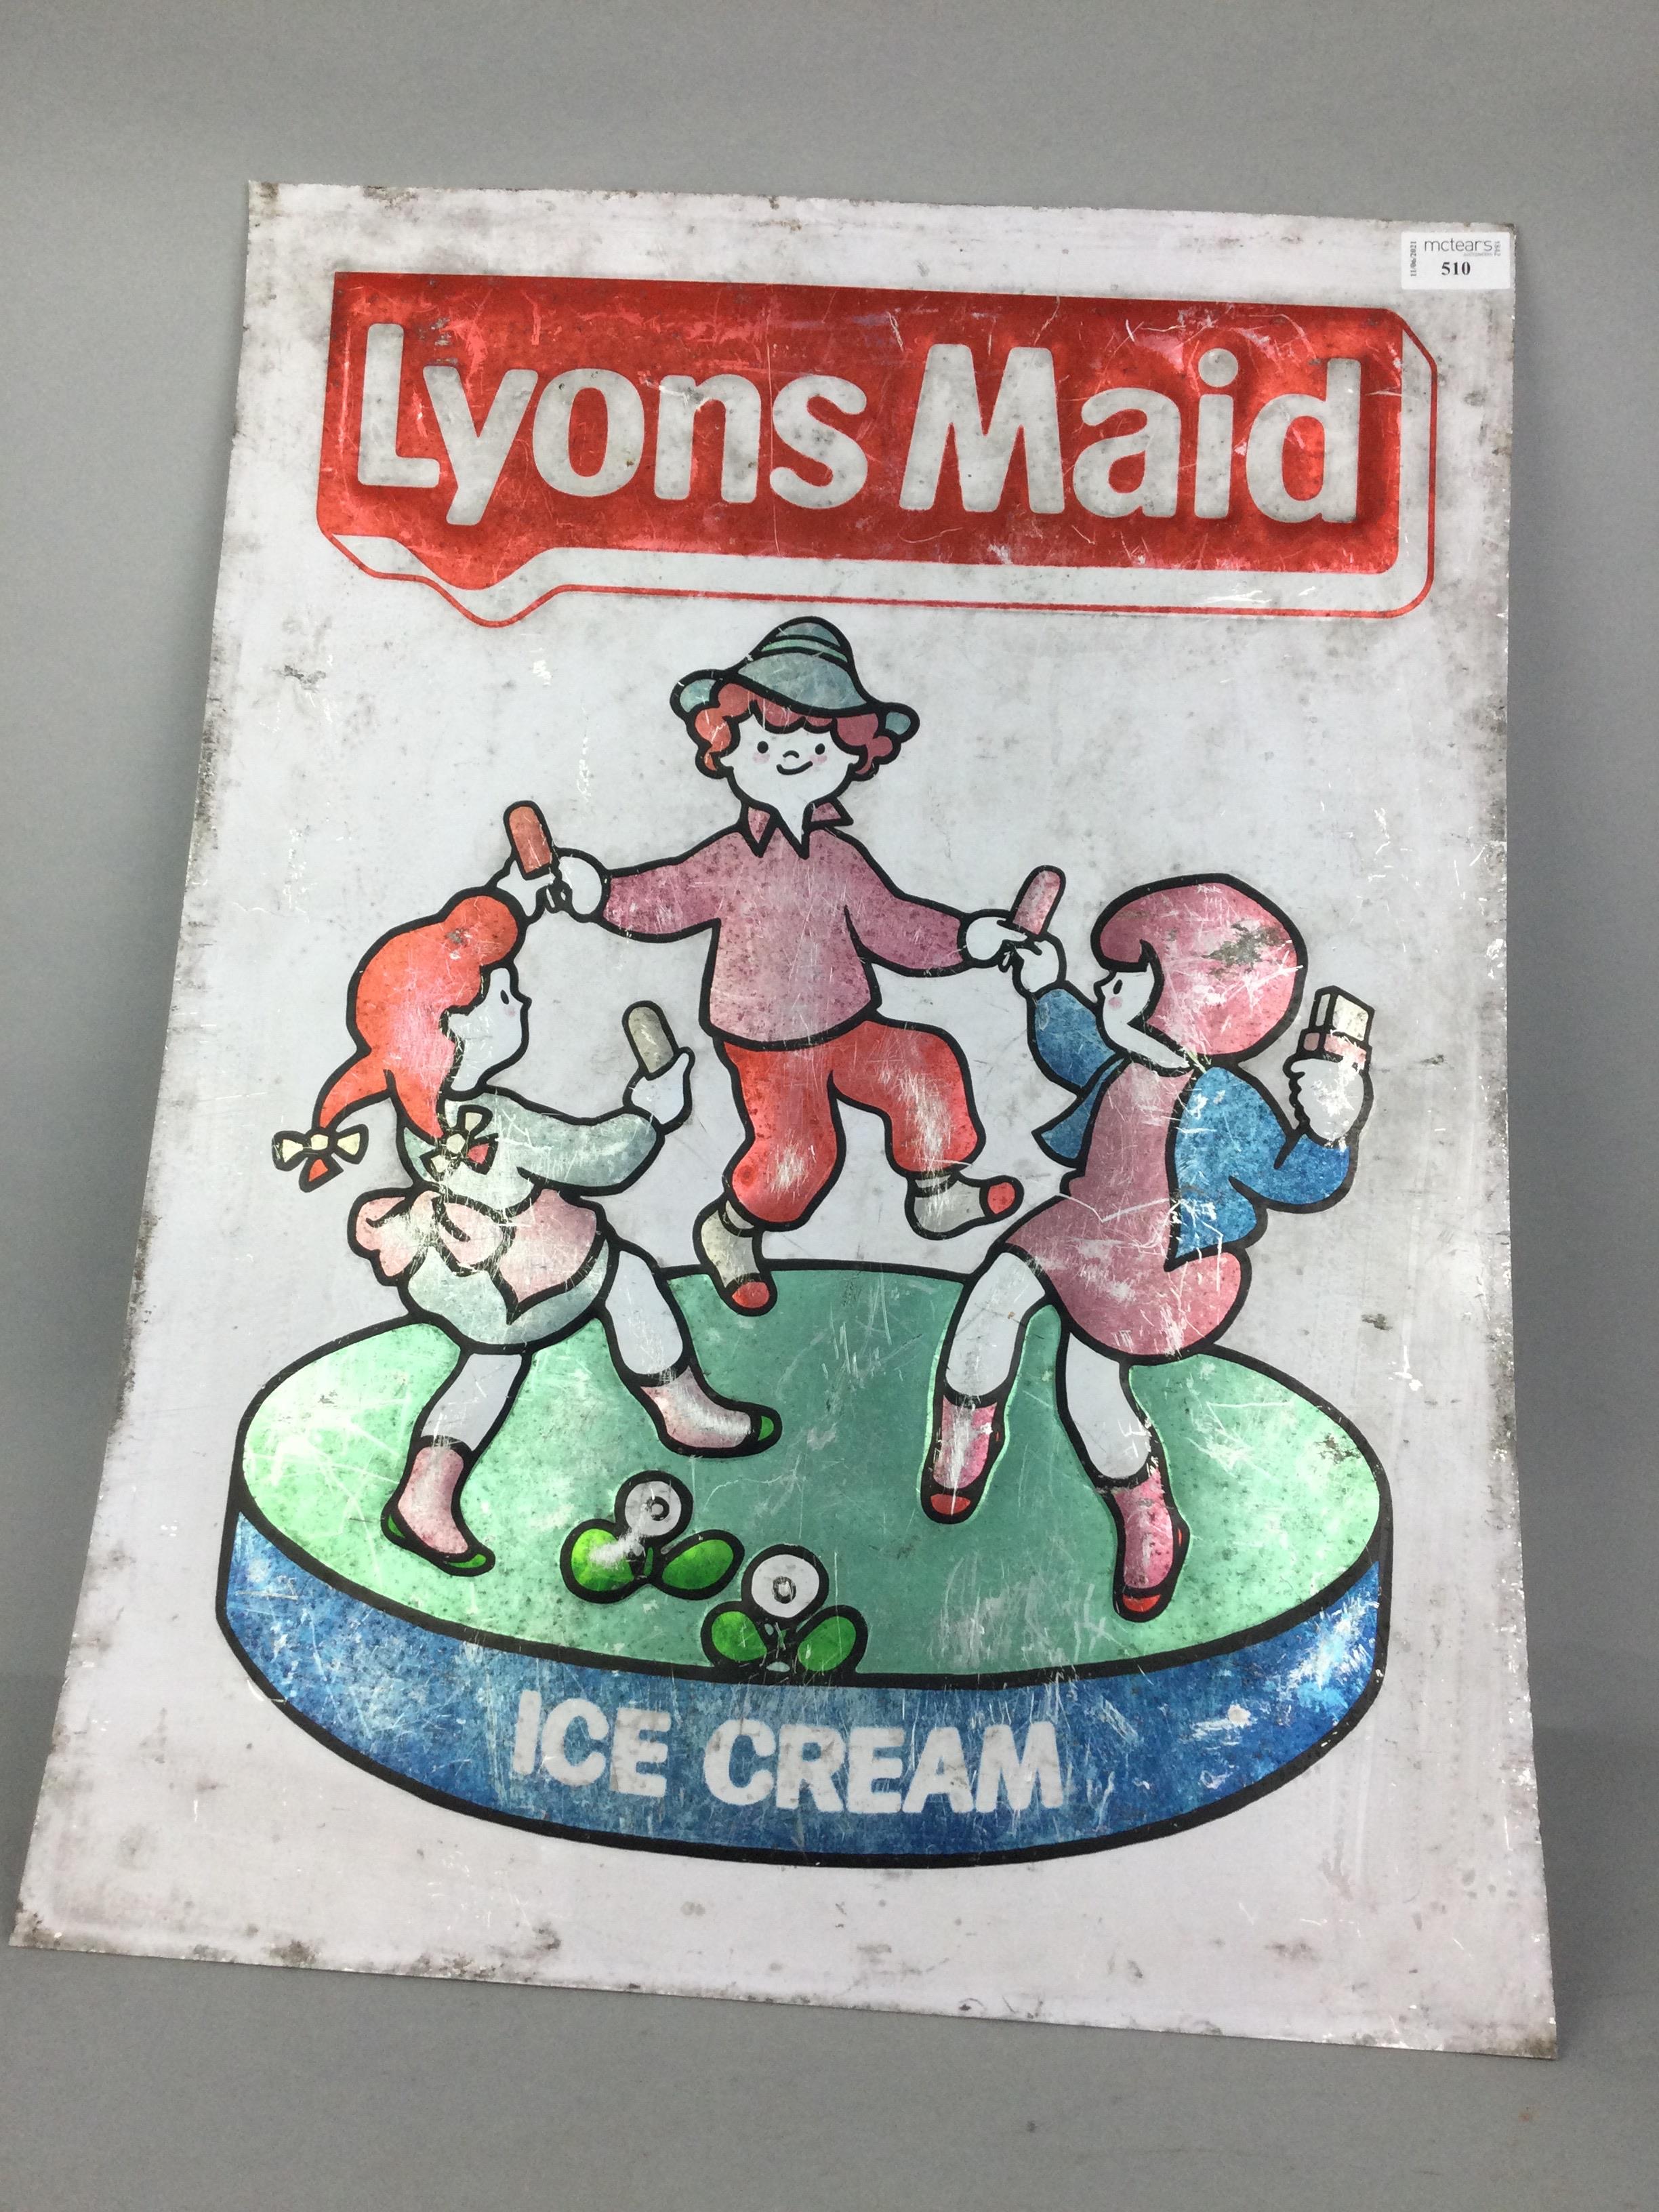 A VINTAGE 'LYONS MAID ICE CREAM' METAL ADVERTISEMENT SIGN